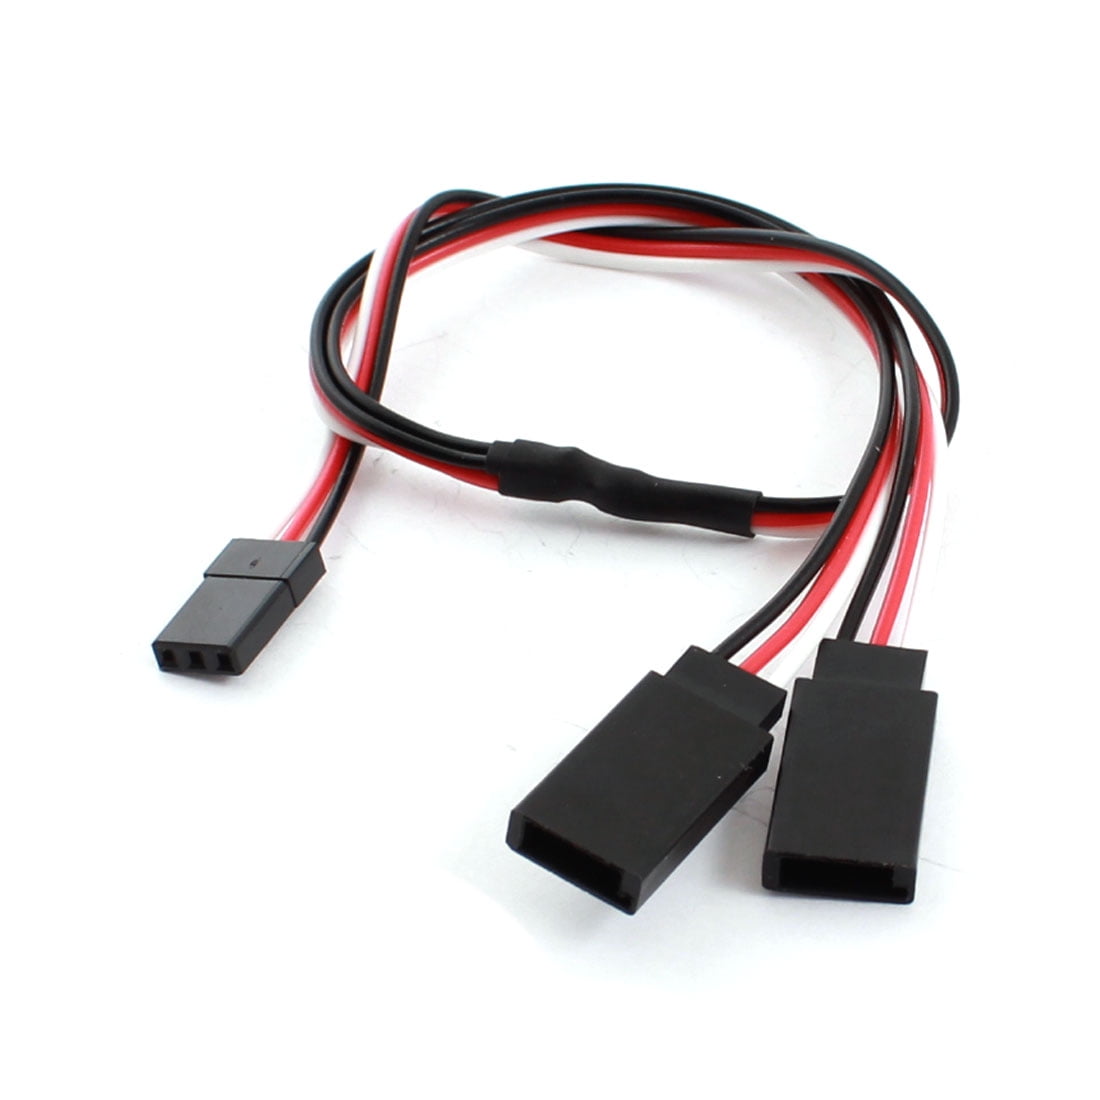 uxcell 15cm Y Servo Extension Cable Remote Control Racing Part 1 Female to 2 Male Lead Cord